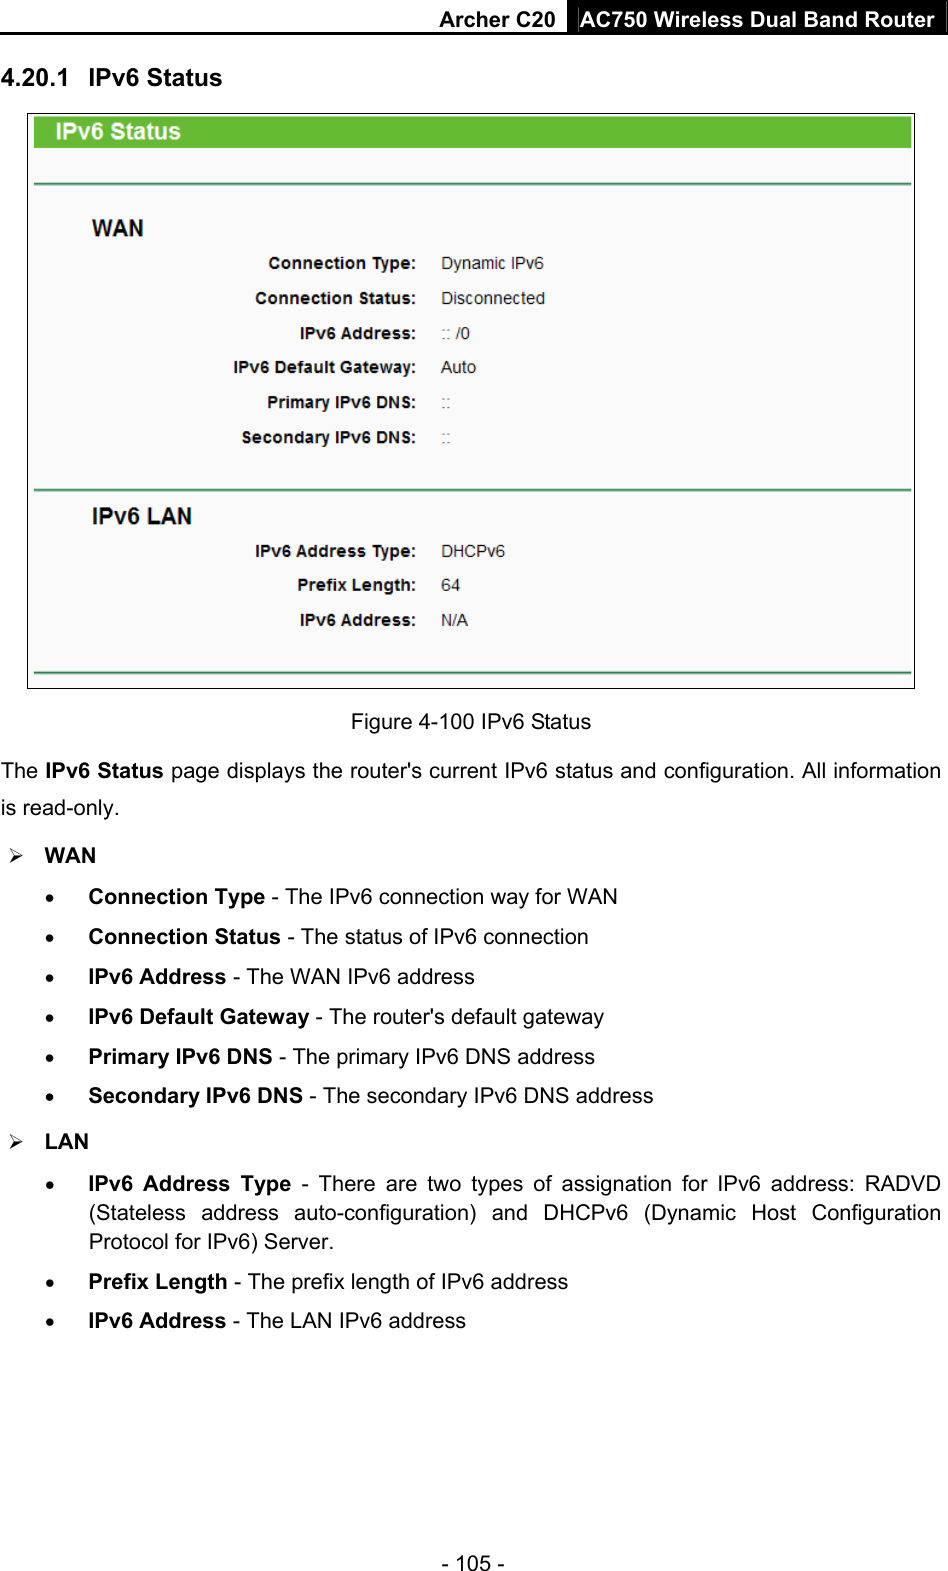 Archer C20 AC750 Wireless Dual Band Router - 105 - 4.20.1  IPv6 Status  Figure 4-100 IPv6 Status The IPv6 Status page displays the router&apos;s current IPv6 status and configuration. All information is read-only.    WAN    Connection Type - The IPv6 connection way for WAN  Connection Status - The status of IPv6 connection  IPv6 Address - The WAN IPv6 address  IPv6 Default Gateway - The router&apos;s default gateway  Primary IPv6 DNS - The primary IPv6 DNS address  Secondary IPv6 DNS - The secondary IPv6 DNS address  LAN  IPv6 Address Type - There are two types of assignation for IPv6 address: RADVD (Stateless address auto-configuration) and DHCPv6 (Dynamic Host Configuration Protocol for IPv6) Server.  Prefix Length - The prefix length of IPv6 address  IPv6 Address - The LAN IPv6 address 